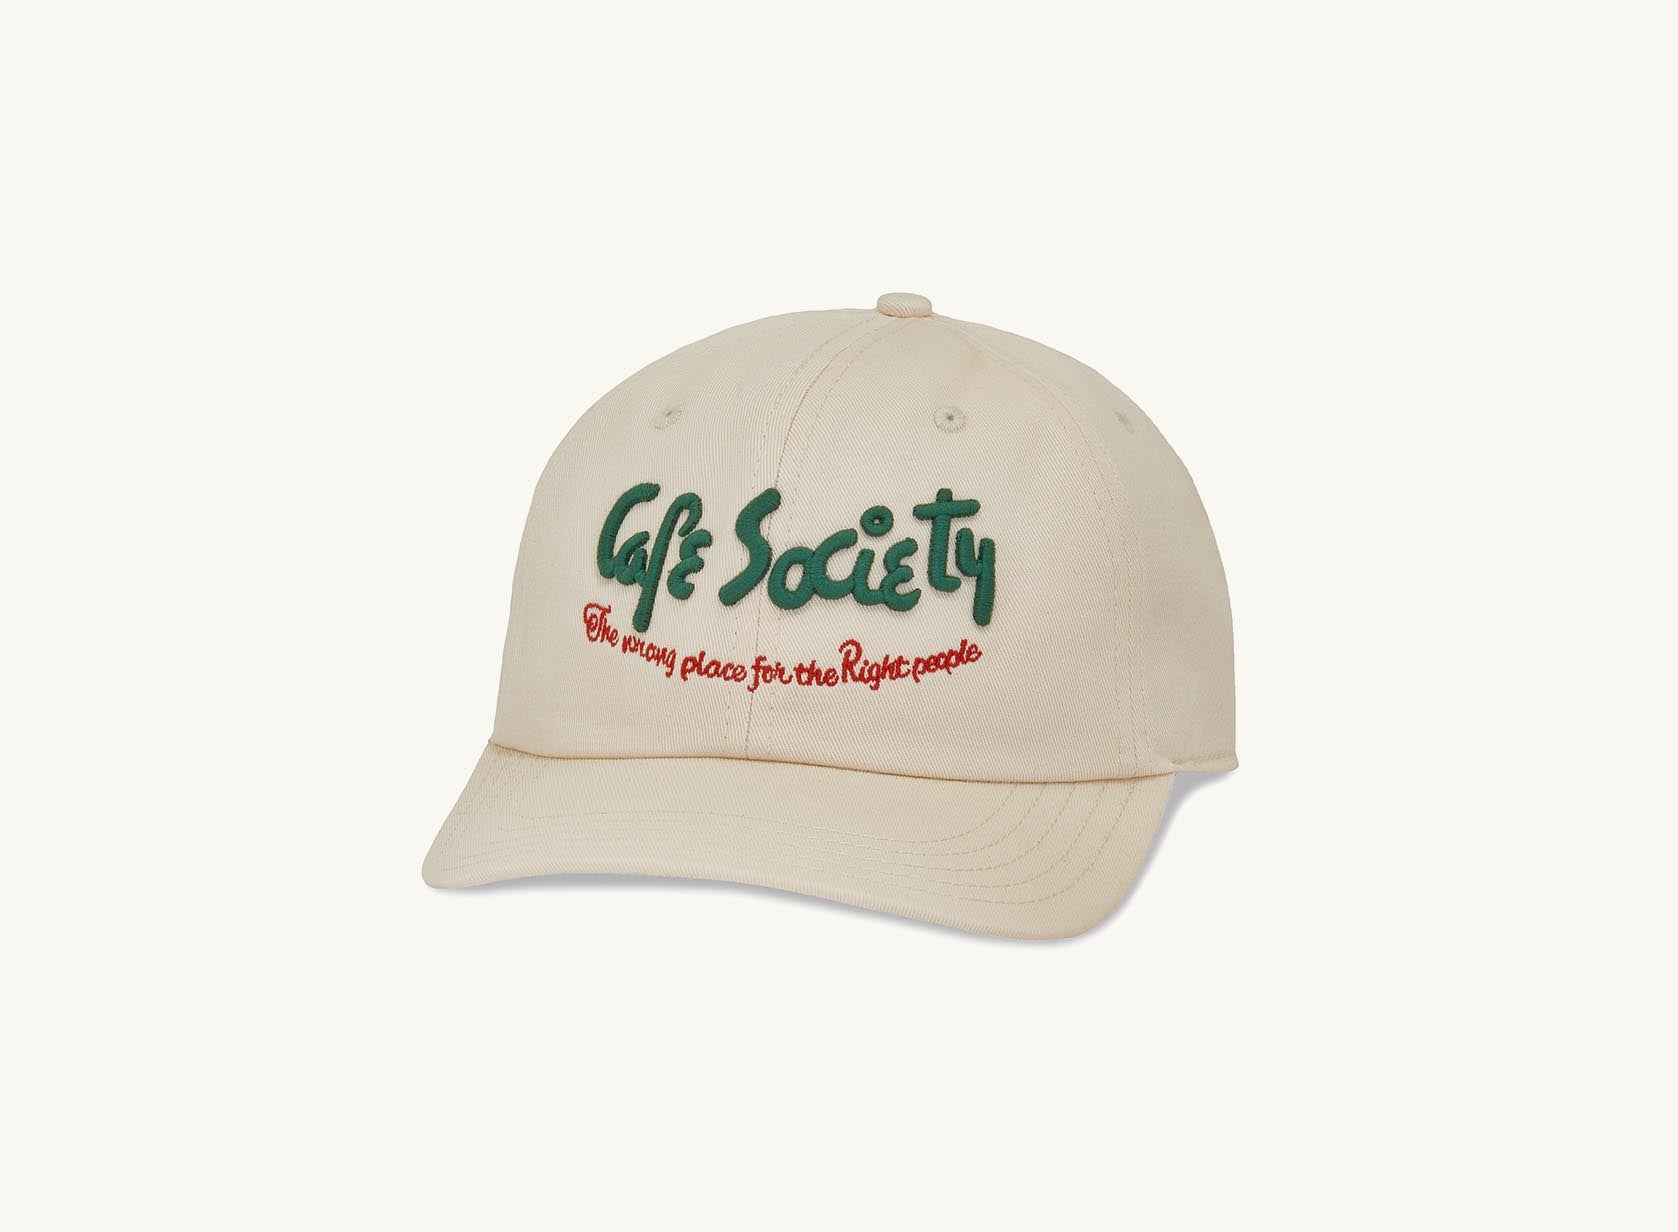 beige cafe society hat